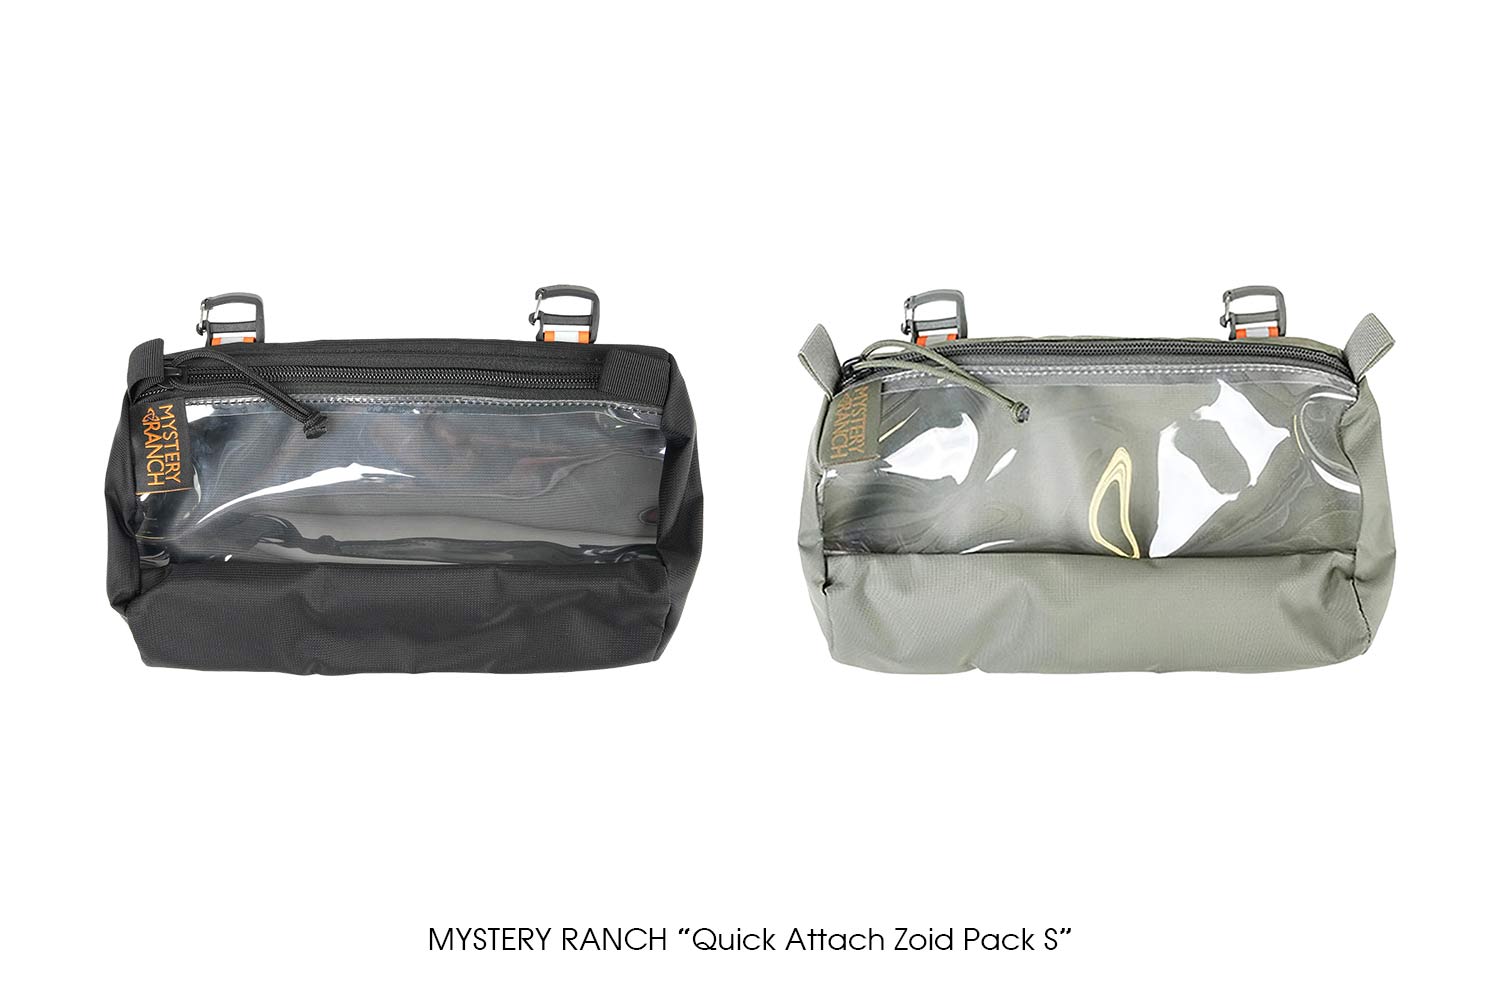 MYSTERY RANCH "Quick Attach Zoid Pack S"